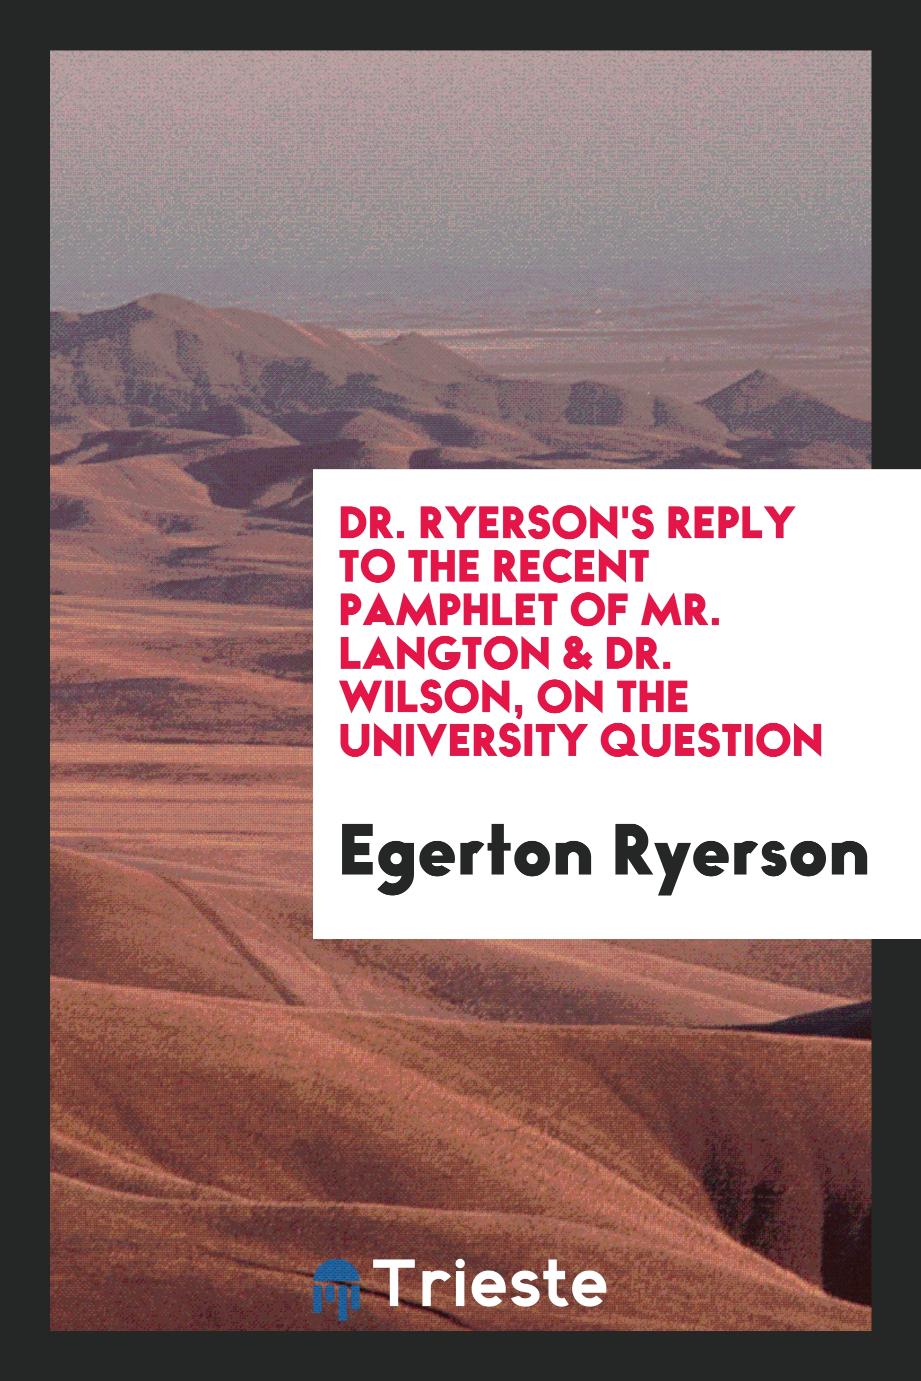 Dr. Ryerson's Reply to the Recent Pamphlet of Mr. Langton & Dr. Wilson, on the University Question